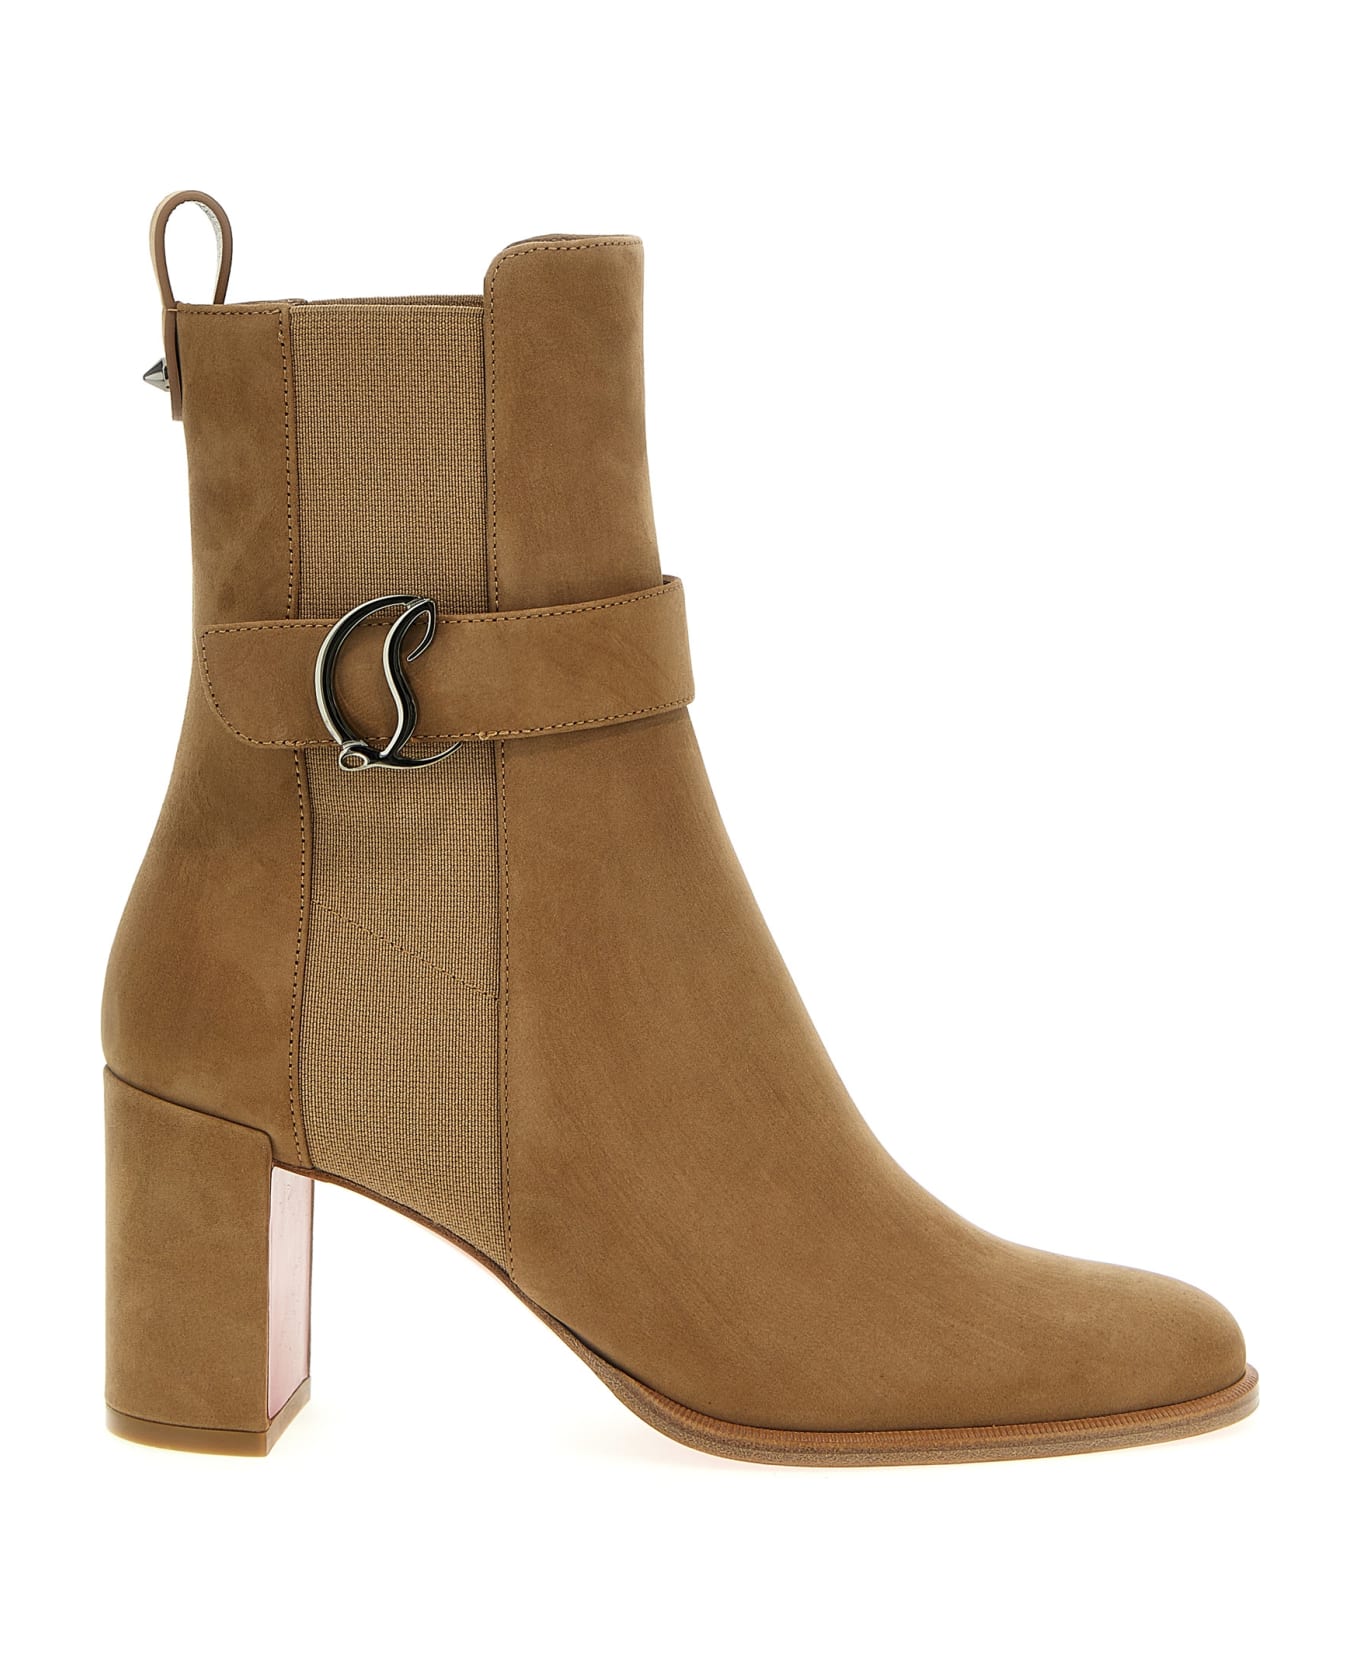 Christian Louboutin 'cl' Ankle Boots - Beige